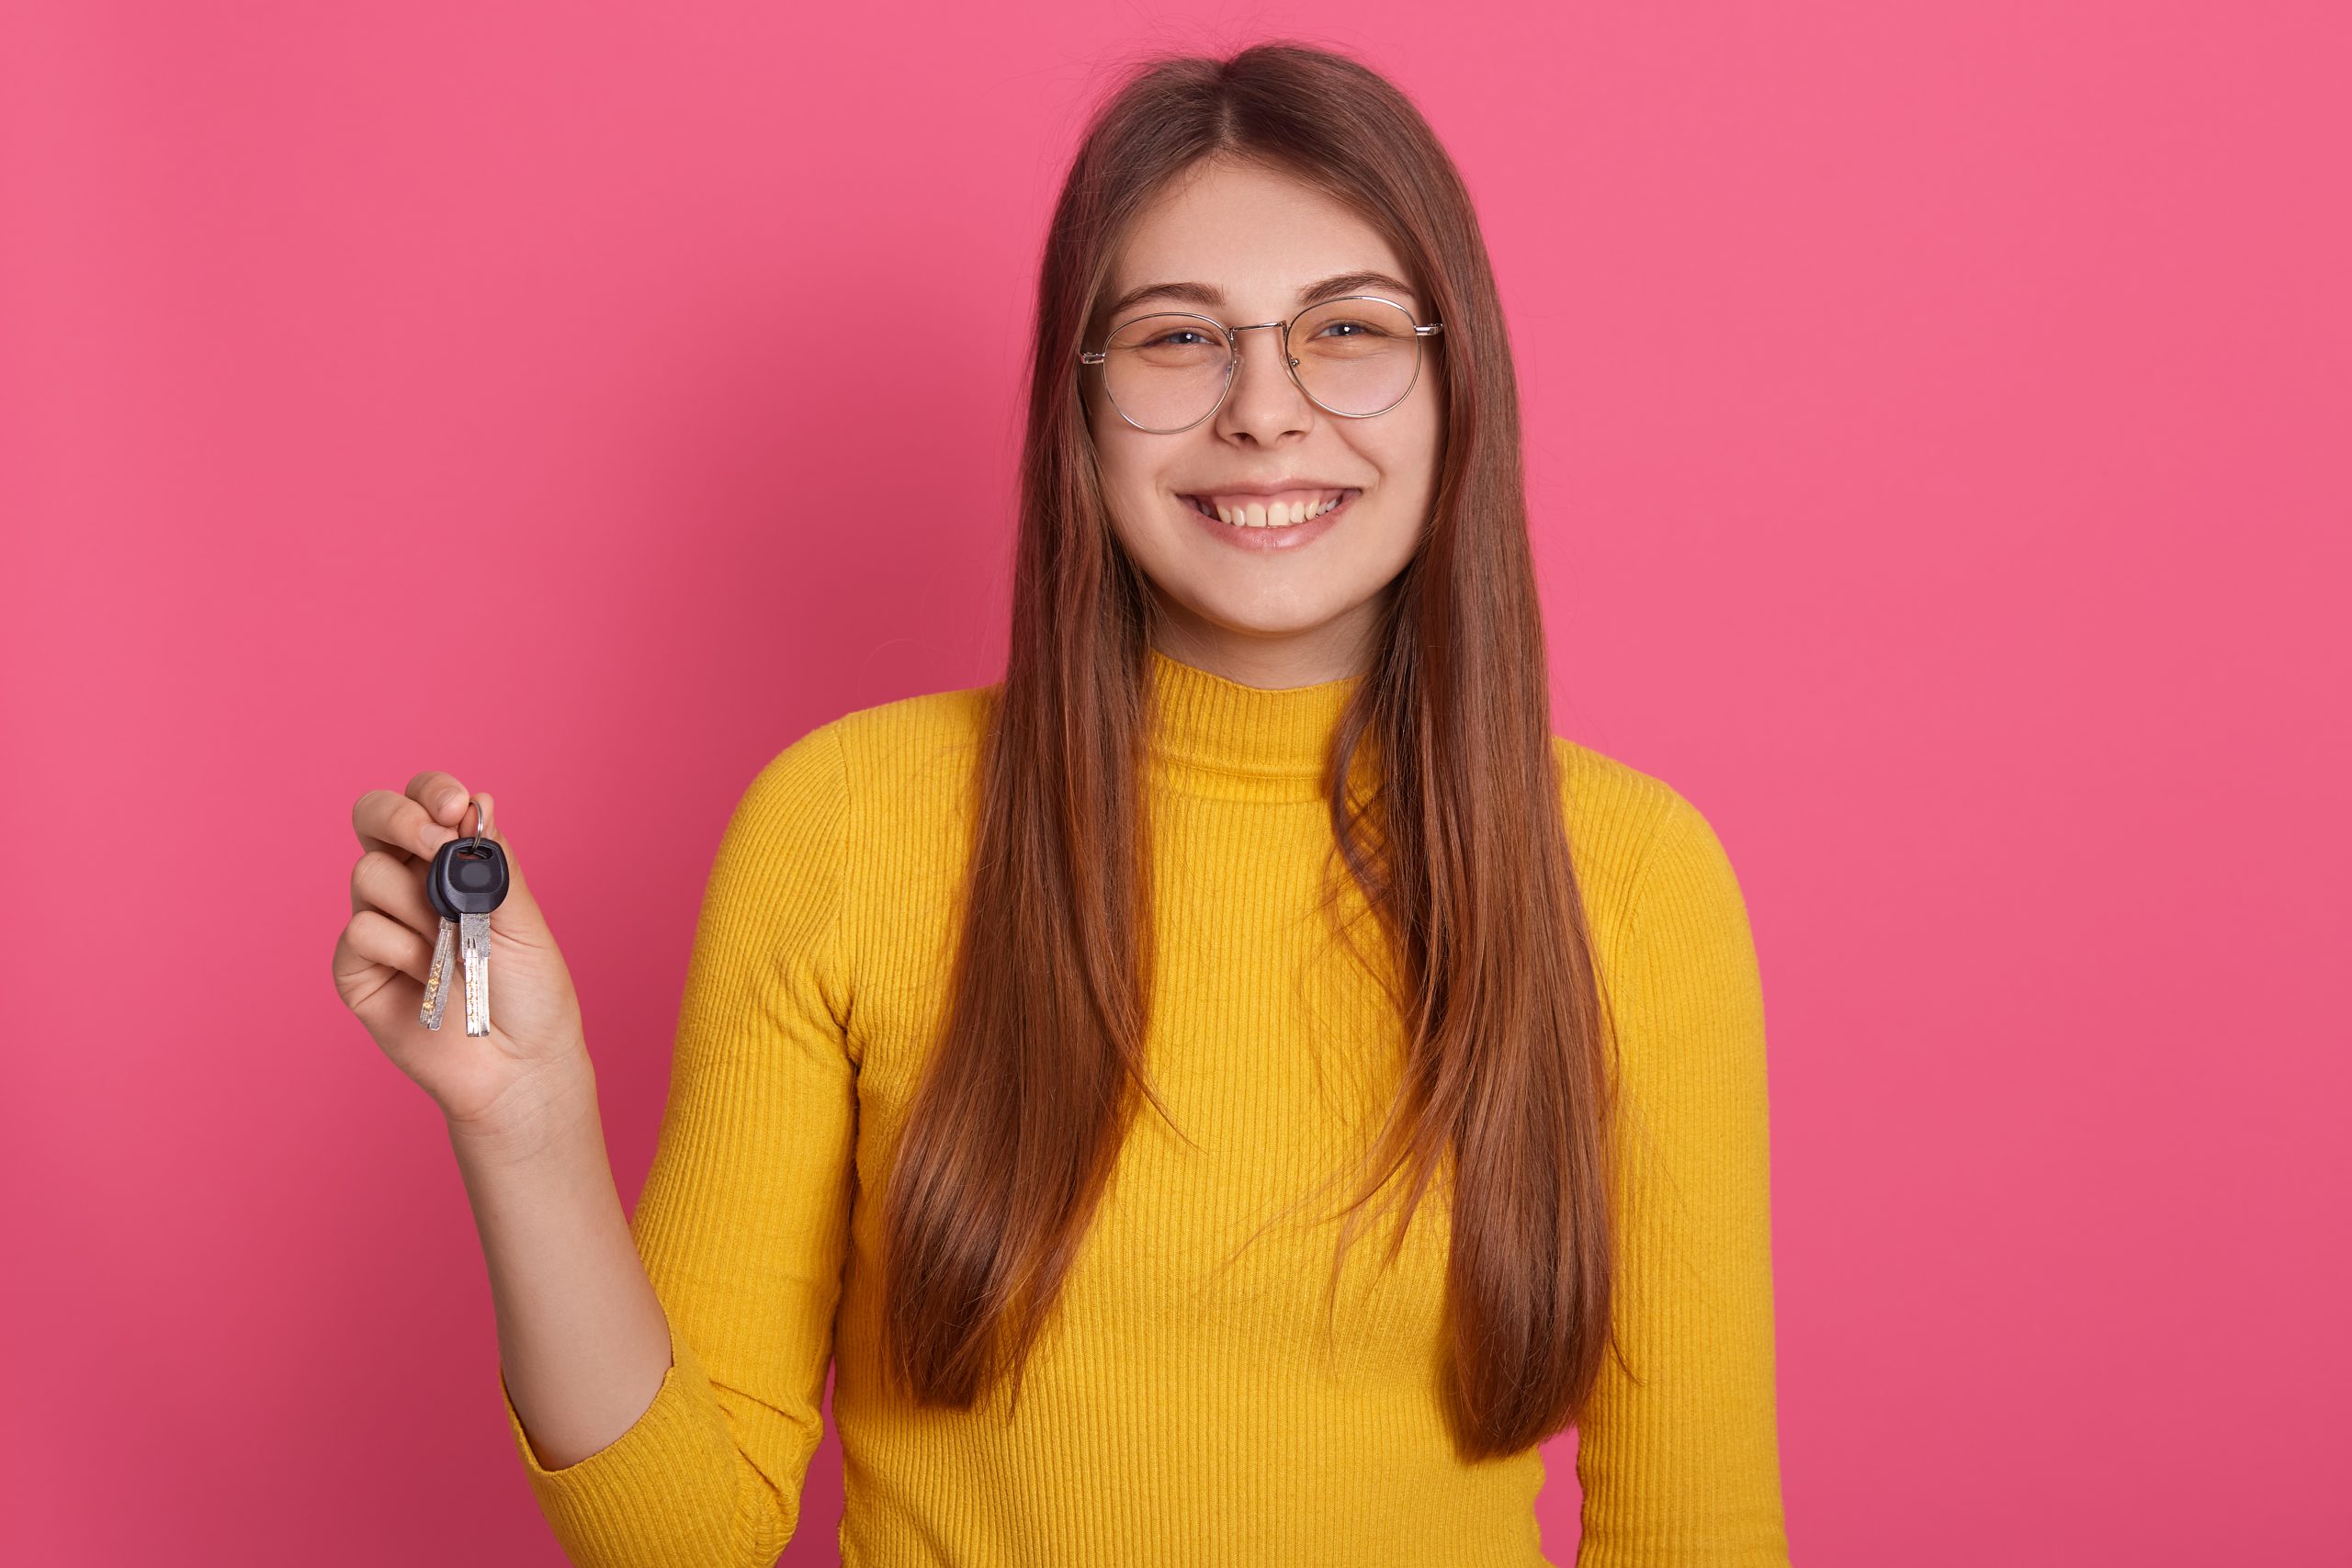 indoor-studio-image-of-adorable-magnificent-young-female-holding-keys-smiling-sincerely-looking-directly-at-camera-wearing-yellow-sweatshirt-and-spectacles-people-and-appartment-concept